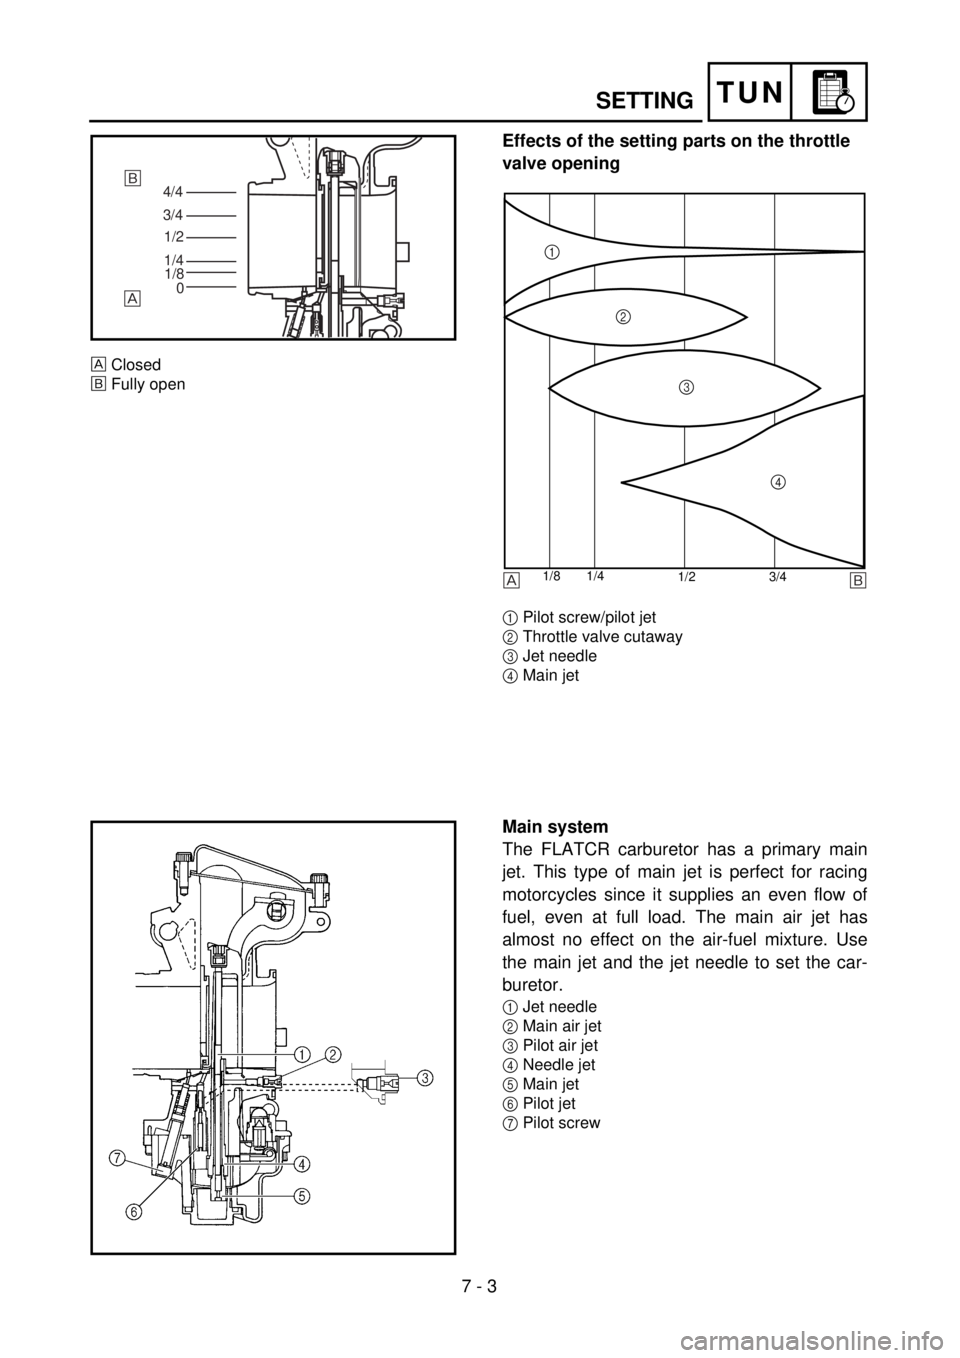 YAMAHA WR 400F 2001  Notices Demploi (in French)  
7 - 3
TUN
 
SETTING 
Effects of the setting parts on the throttle 
valve opening 
1  
Pilot screw/pilot jet  
2  
Throttle valve cutaway  
3  
Jet needle  
4  
Main jet
4/4
3/4
1/2
1/4
1/8
0õ

Clo